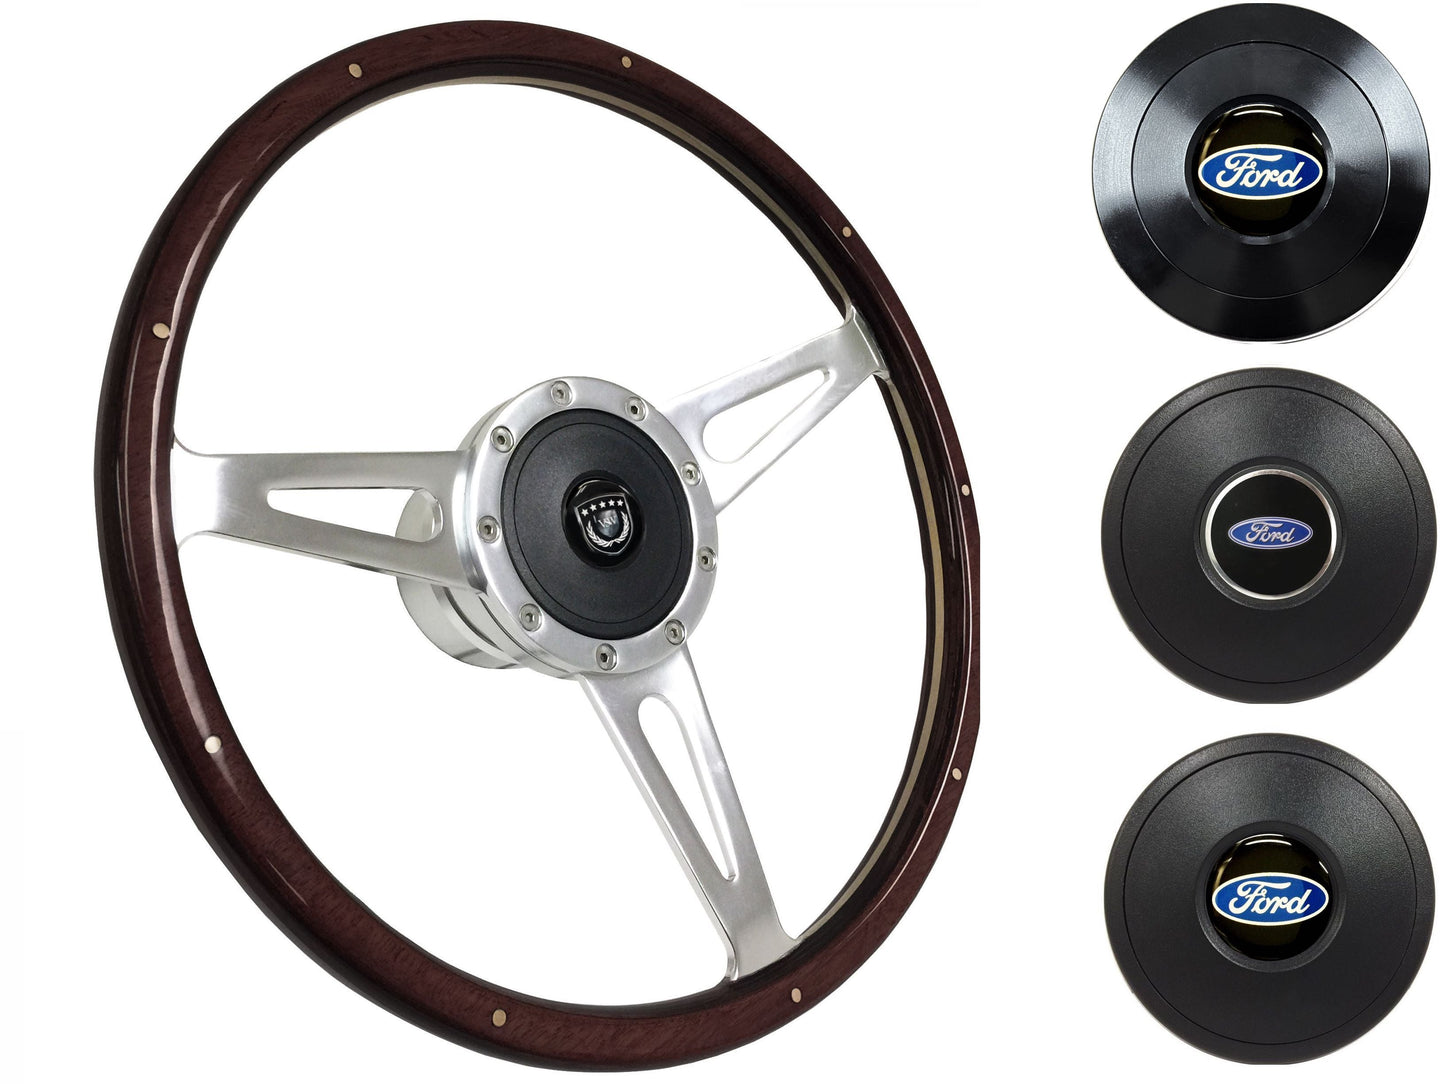 1969, 78-91 Ford Truck Steering Wheel Kit | Deluxe Espresso Wood | ST3053A